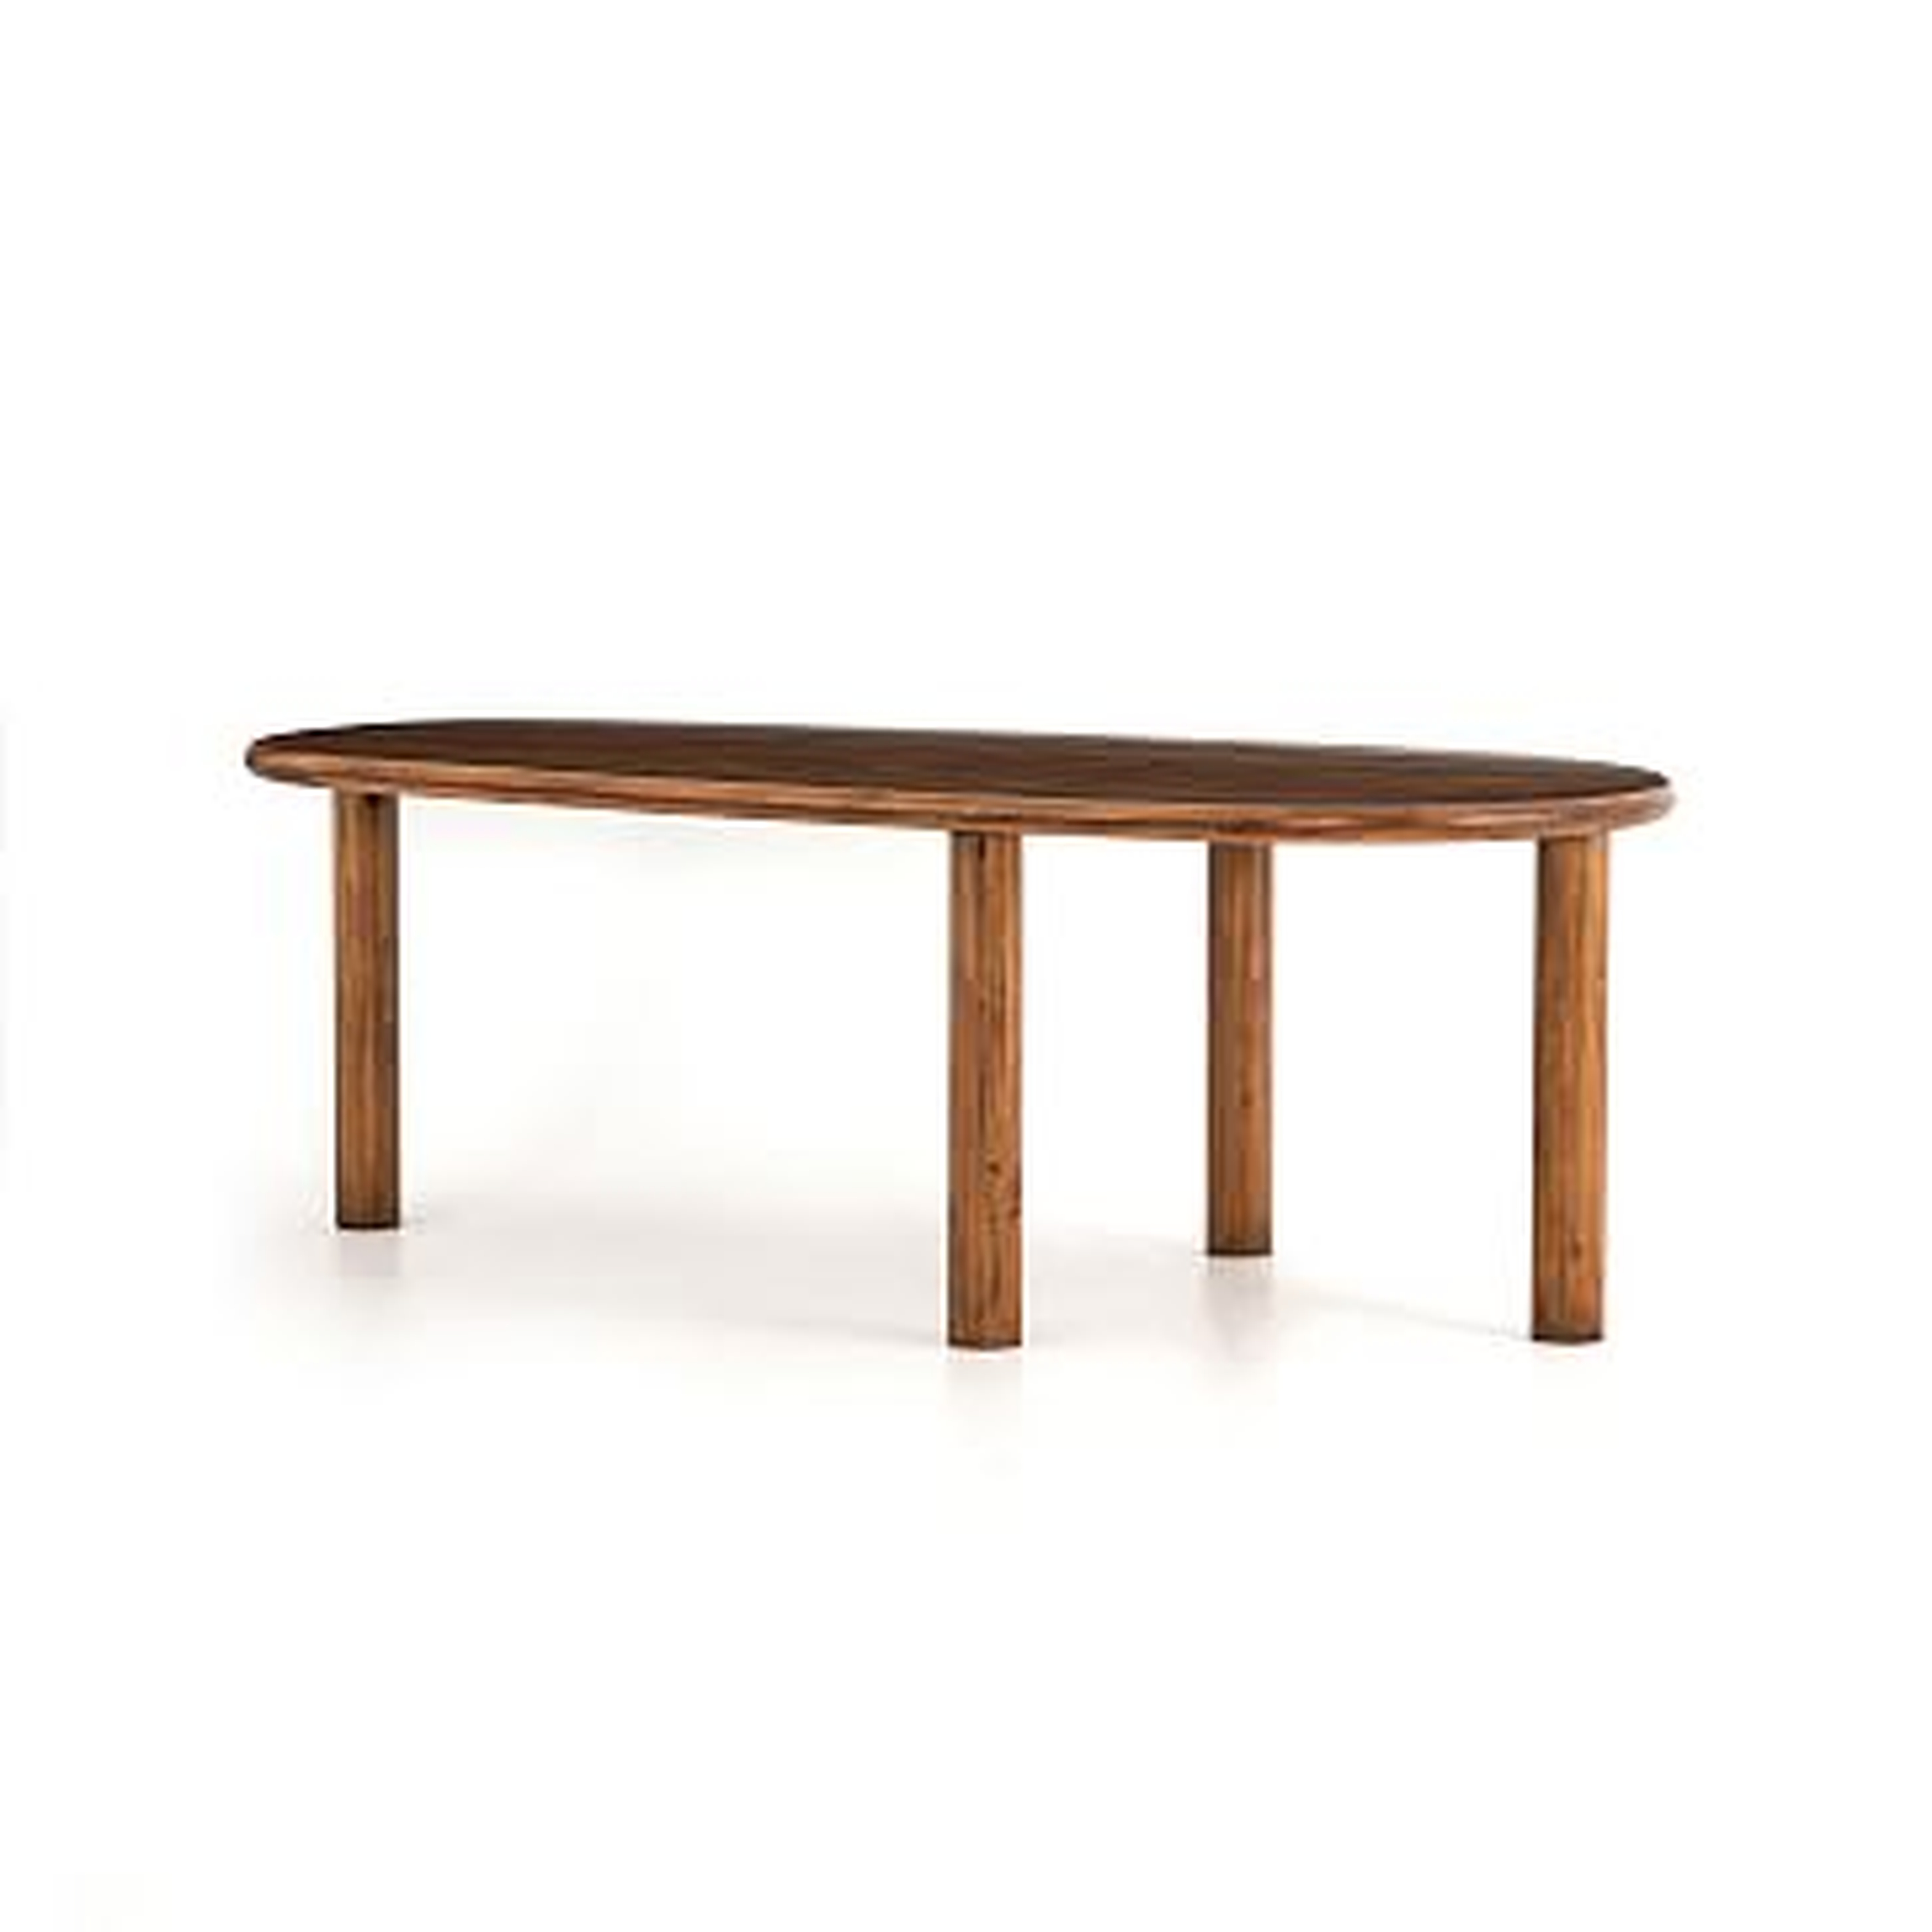 Rounded Legs Dining Table - West Elm